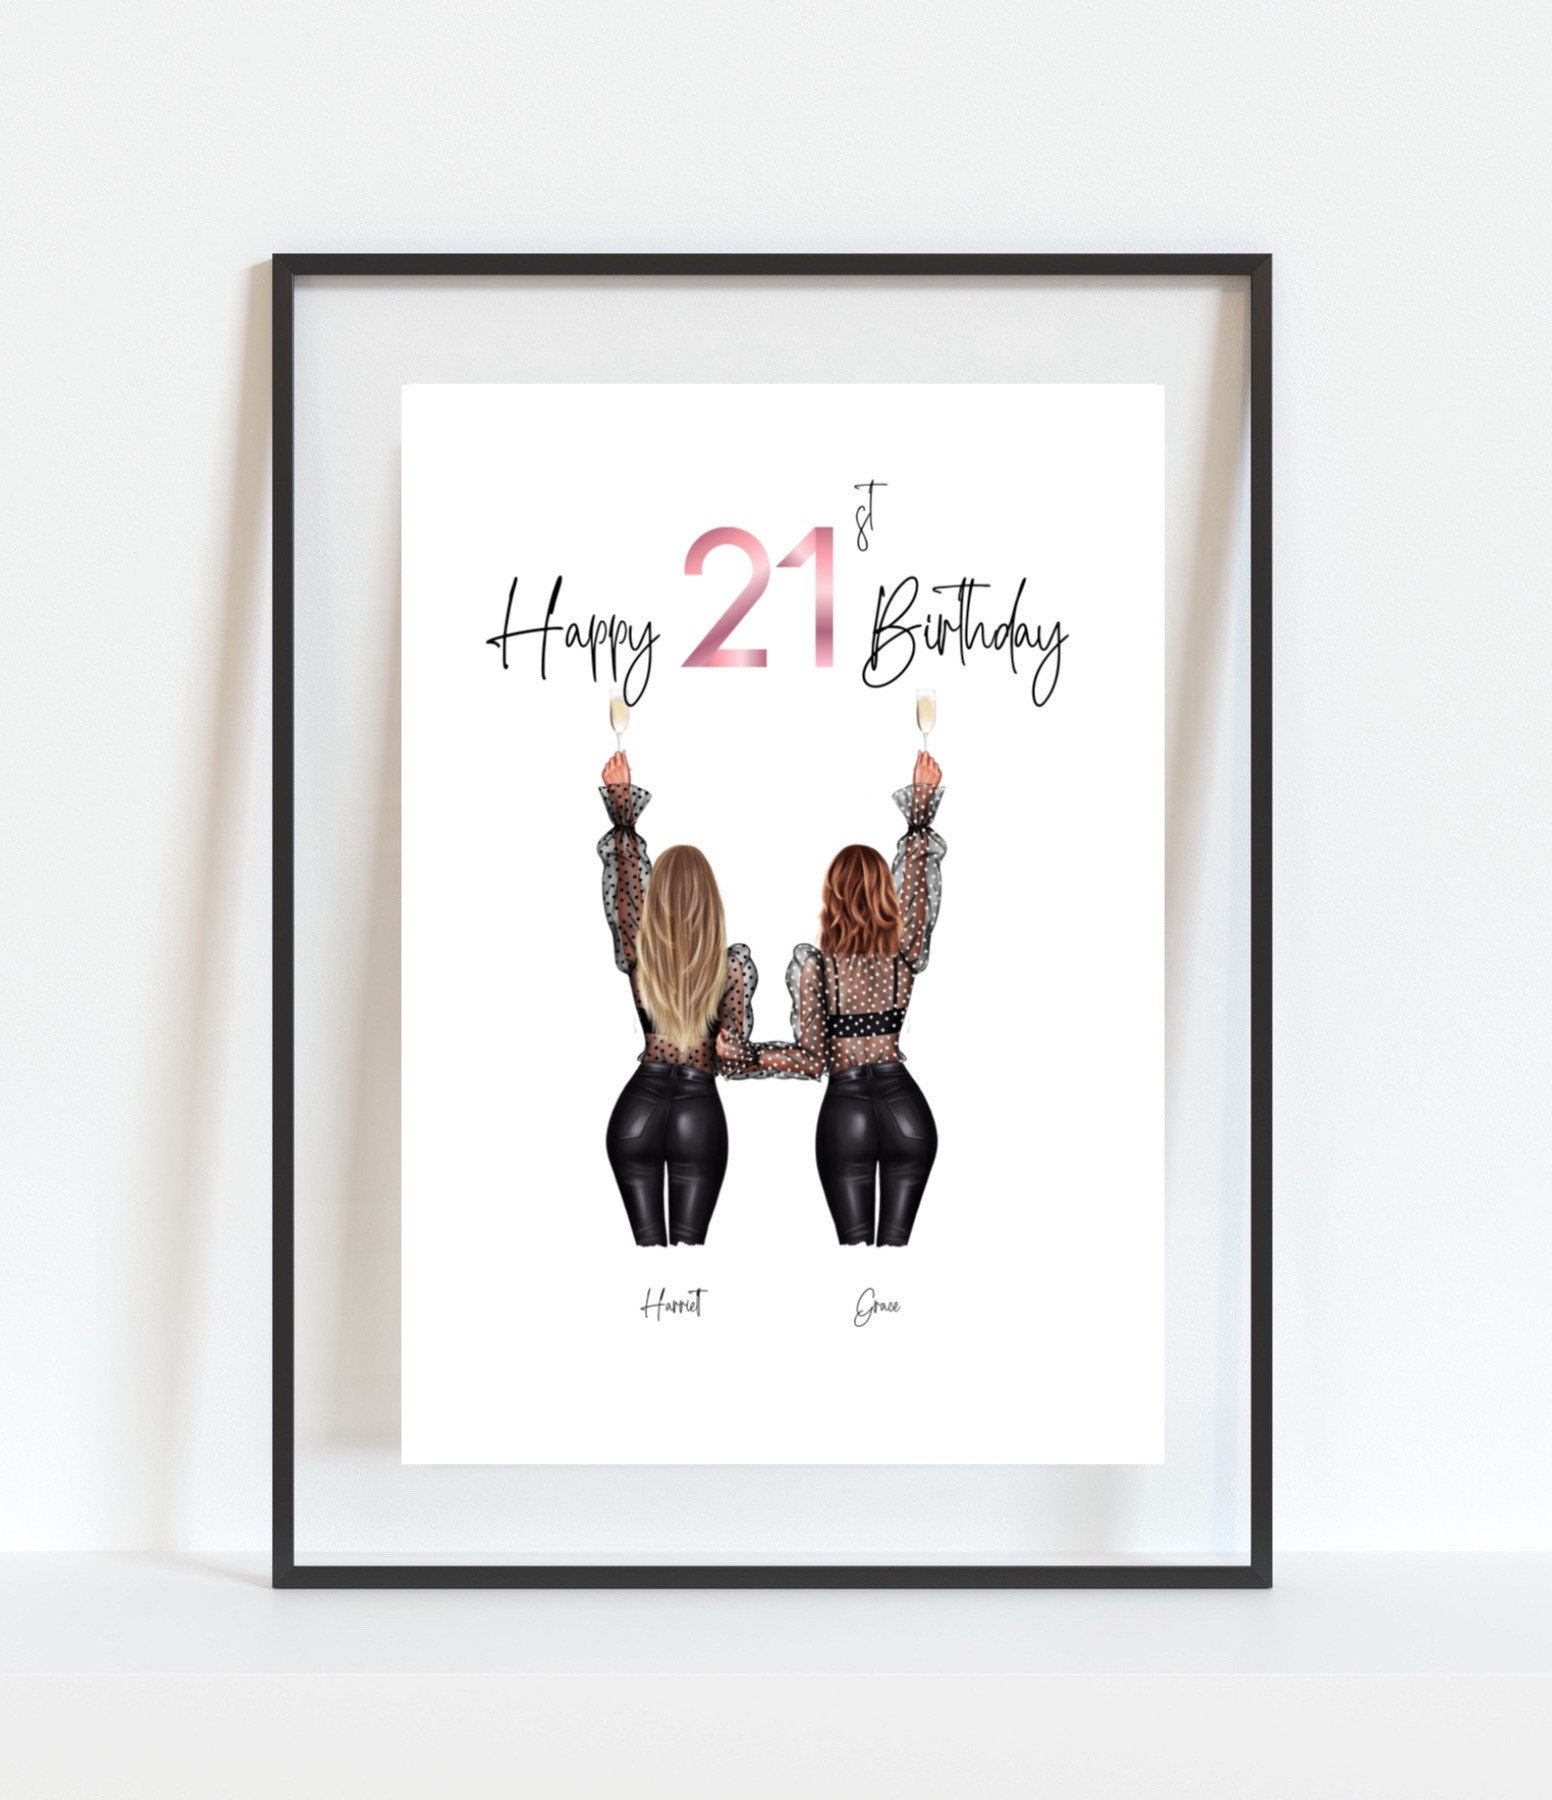 Share more than 187 personalised 21st birthday gifts super hot